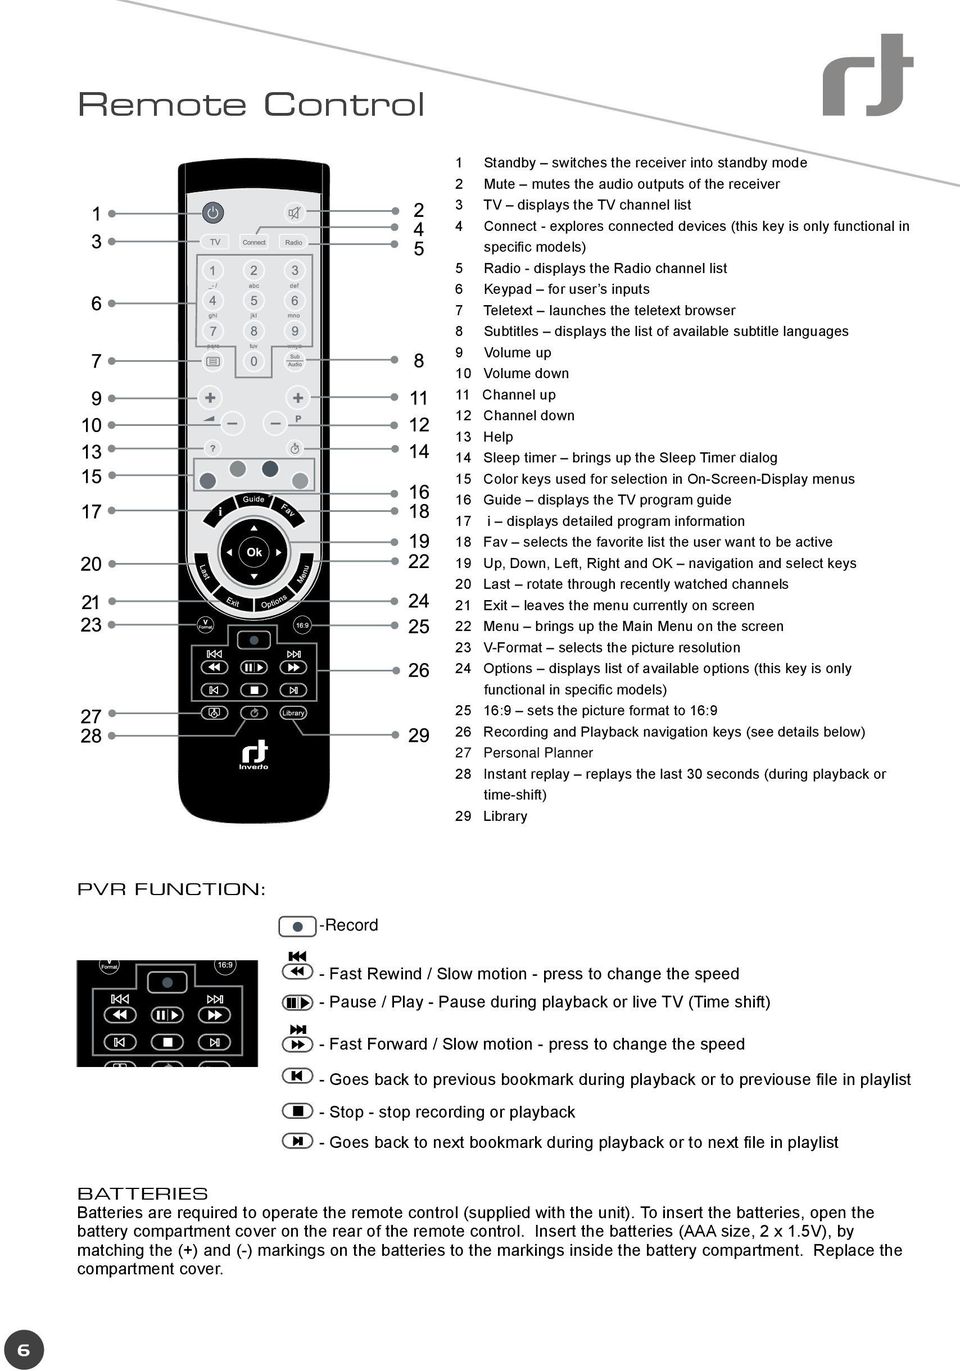 languages 9 Volume up 10 Volume down 11 Channel up 12 Channel down 13 Help 14 Sleep timer brings up the Sleep Timer dialog 15 Color keys used for selection in On-Screen-Display menus 16 Guide